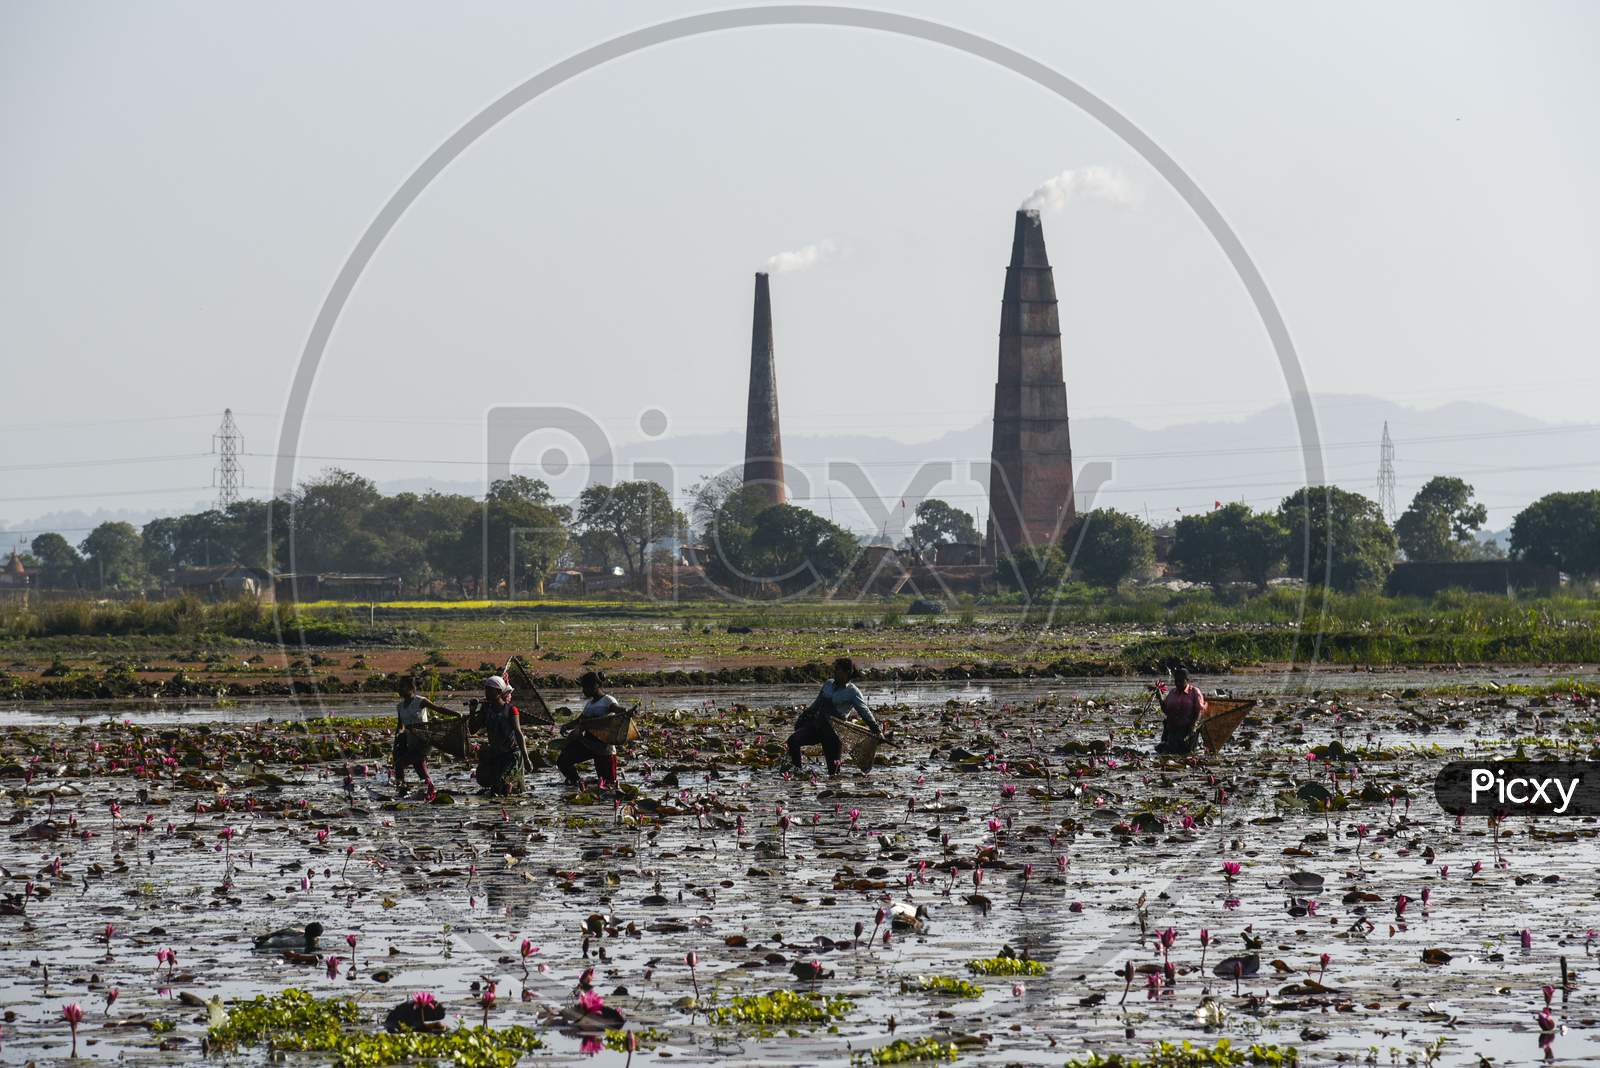 Women Fishing In A Lake, In A Village, In Morigaon District Of Assam